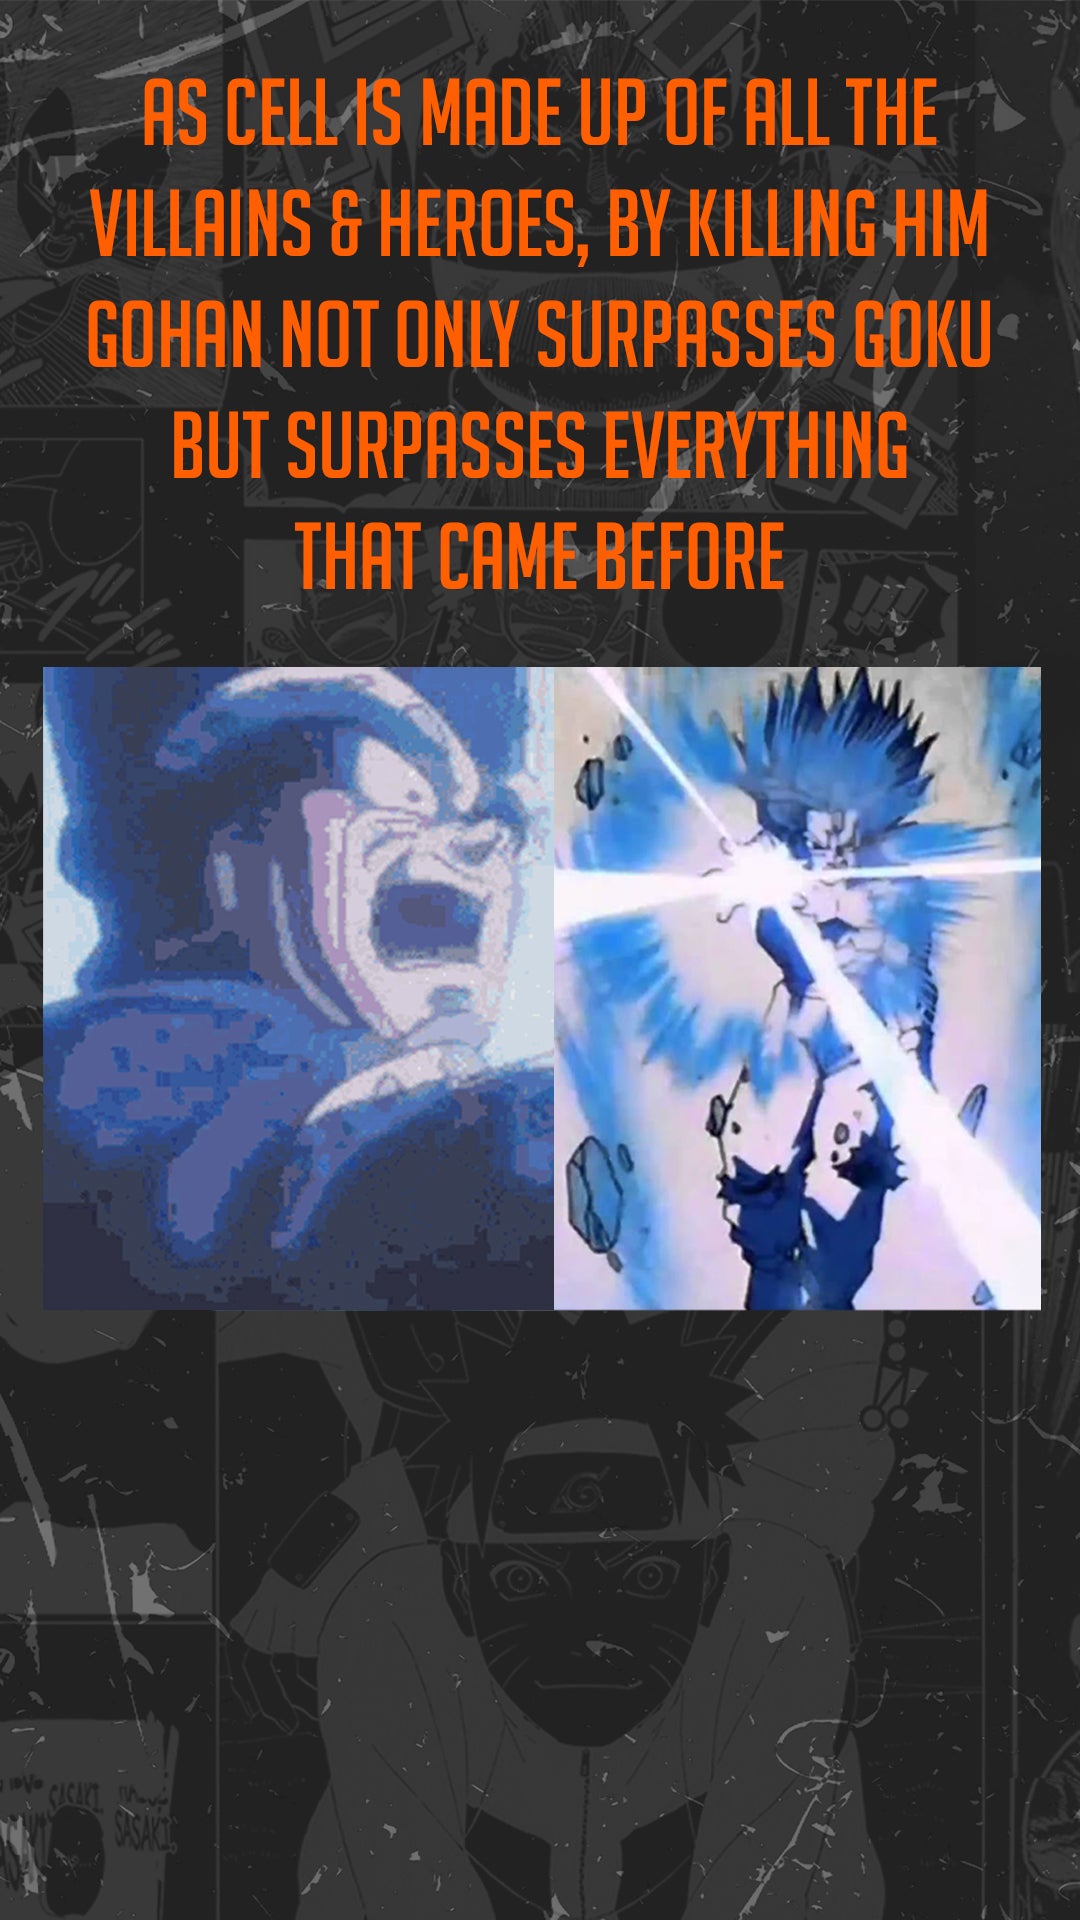 This moment is such a conclusive ending for the Dragonball arcs because Cell represents EVERYONE and he's getting blown away by a one armed Gohan. It's excellent visual storytelling to show that Goku has passed the torch to his son, and he's surpassed everyone in the story in every single way. Side note; the broken arm is an extra reference to future Gohan failing to destroy the androids in the future where he never had his fathers guidance.